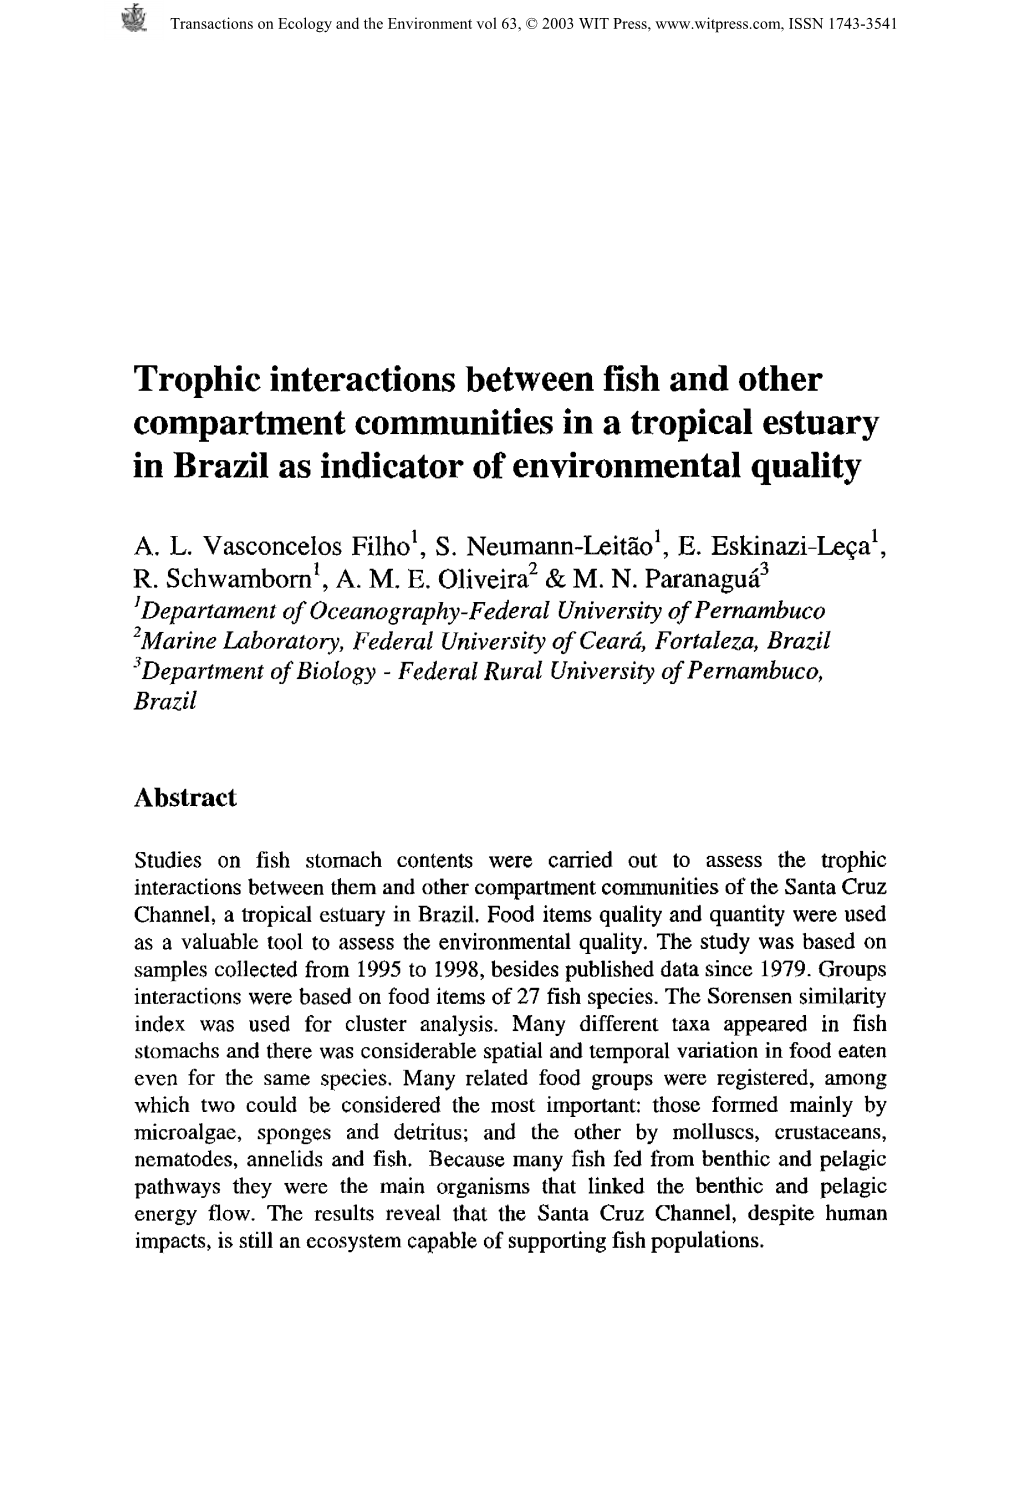 Trophic Interactions Between Fish and Other Compartment Communities in a Tropical Estuary in Brazil As Indicator of Environmental Quality